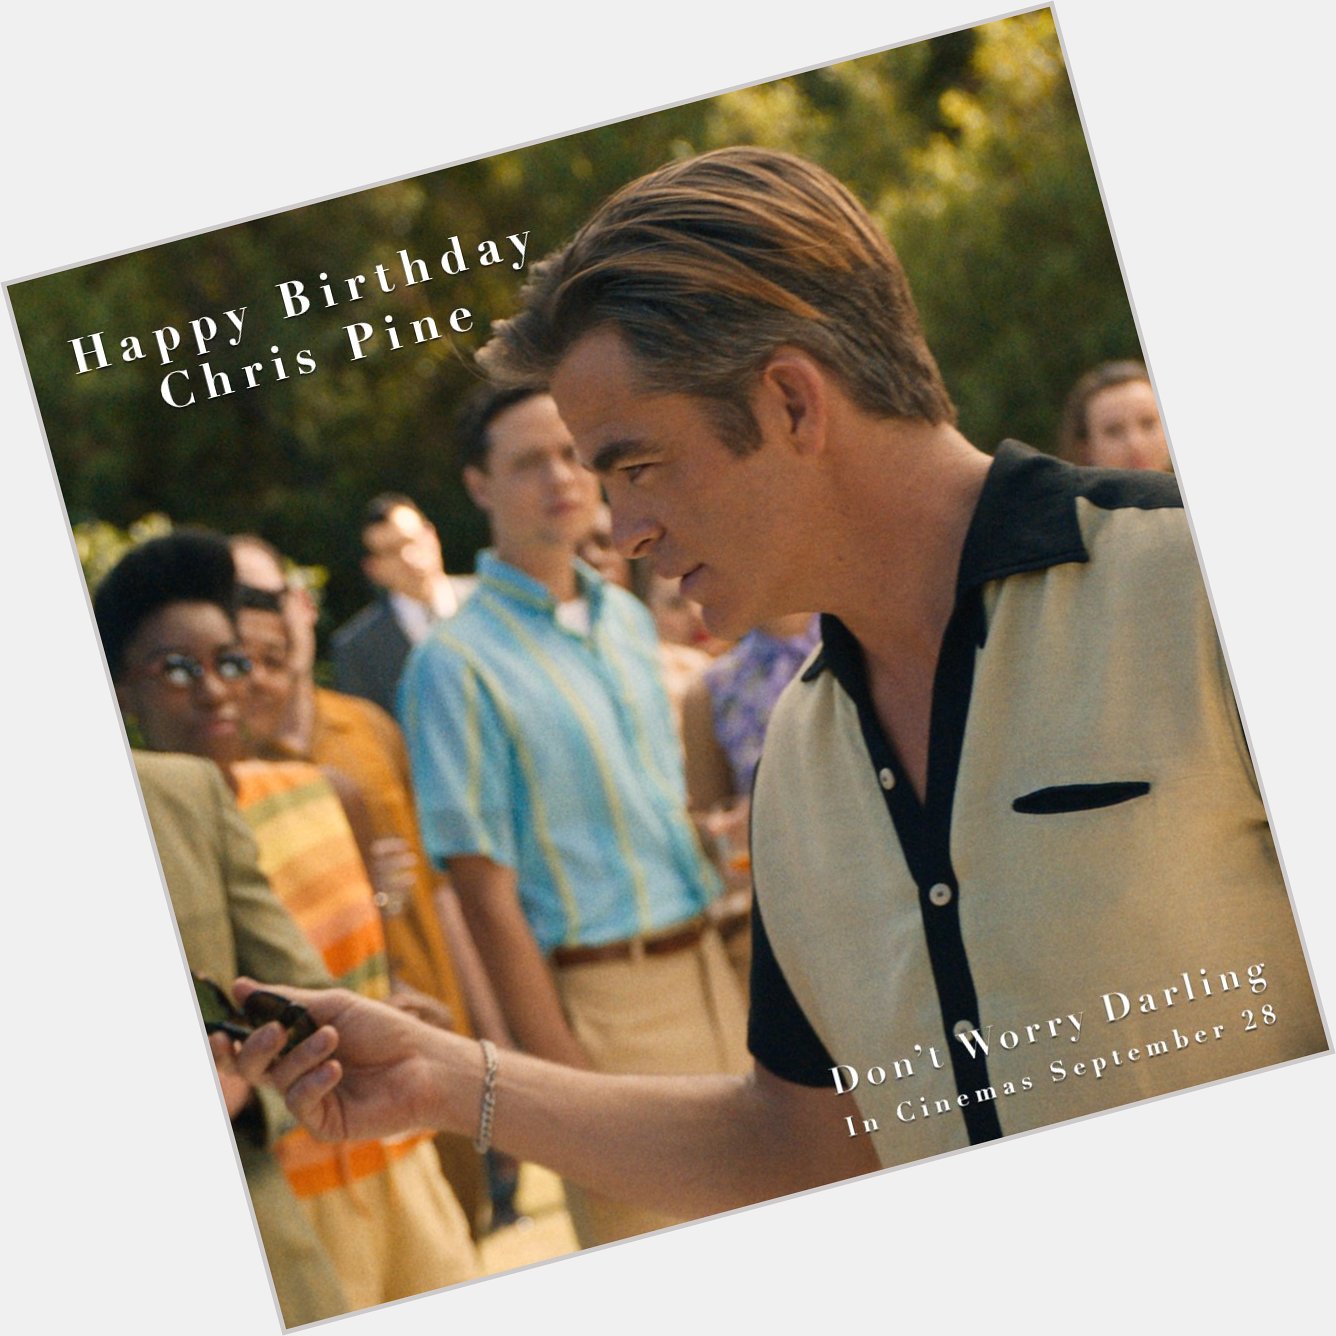 Happy birthday, Chris Pine!  
Get ready for him in only in cinemas September 28. 